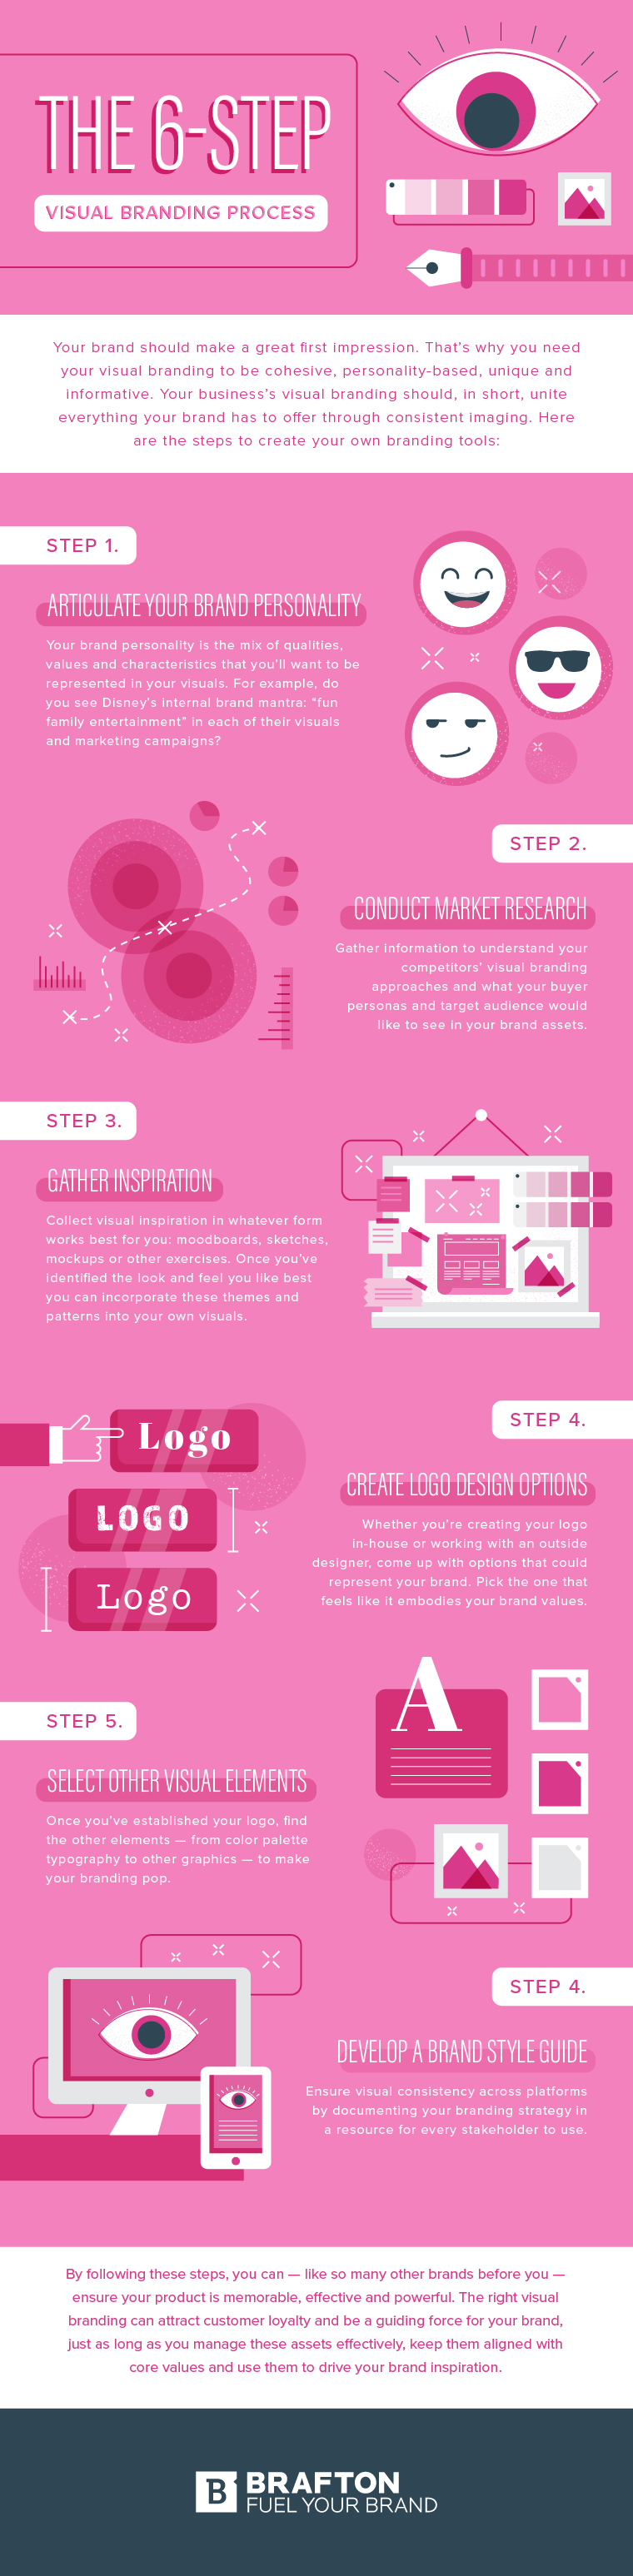 Visual branding: The essential guide to building your visual brand